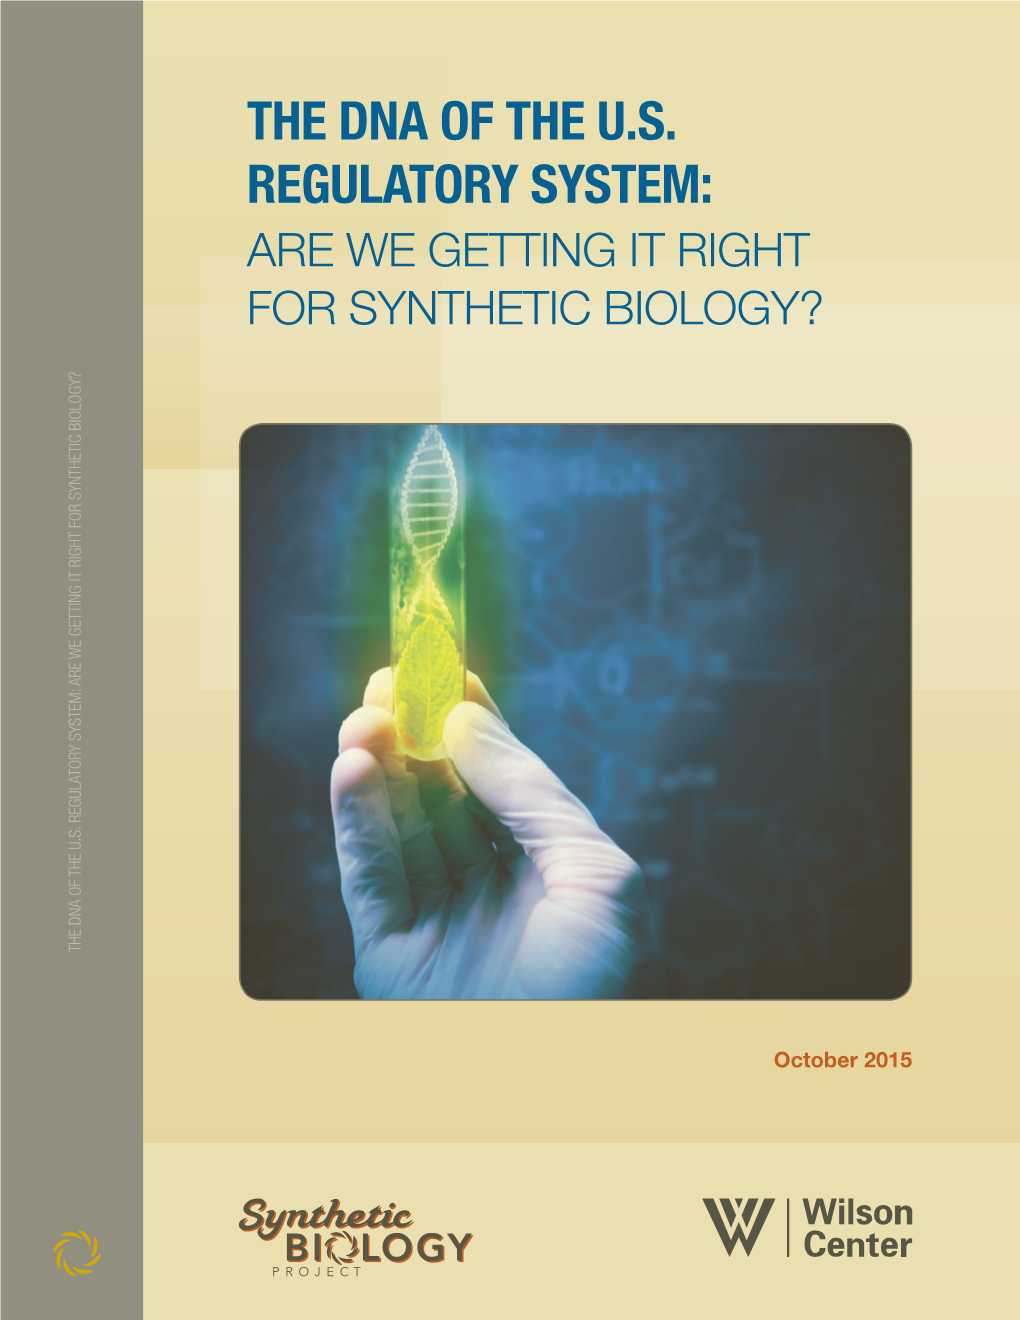 The Dna of the U.S. Regulatory System: Are We Getting It Right for Synthetic Biology? the Dna of the U.S